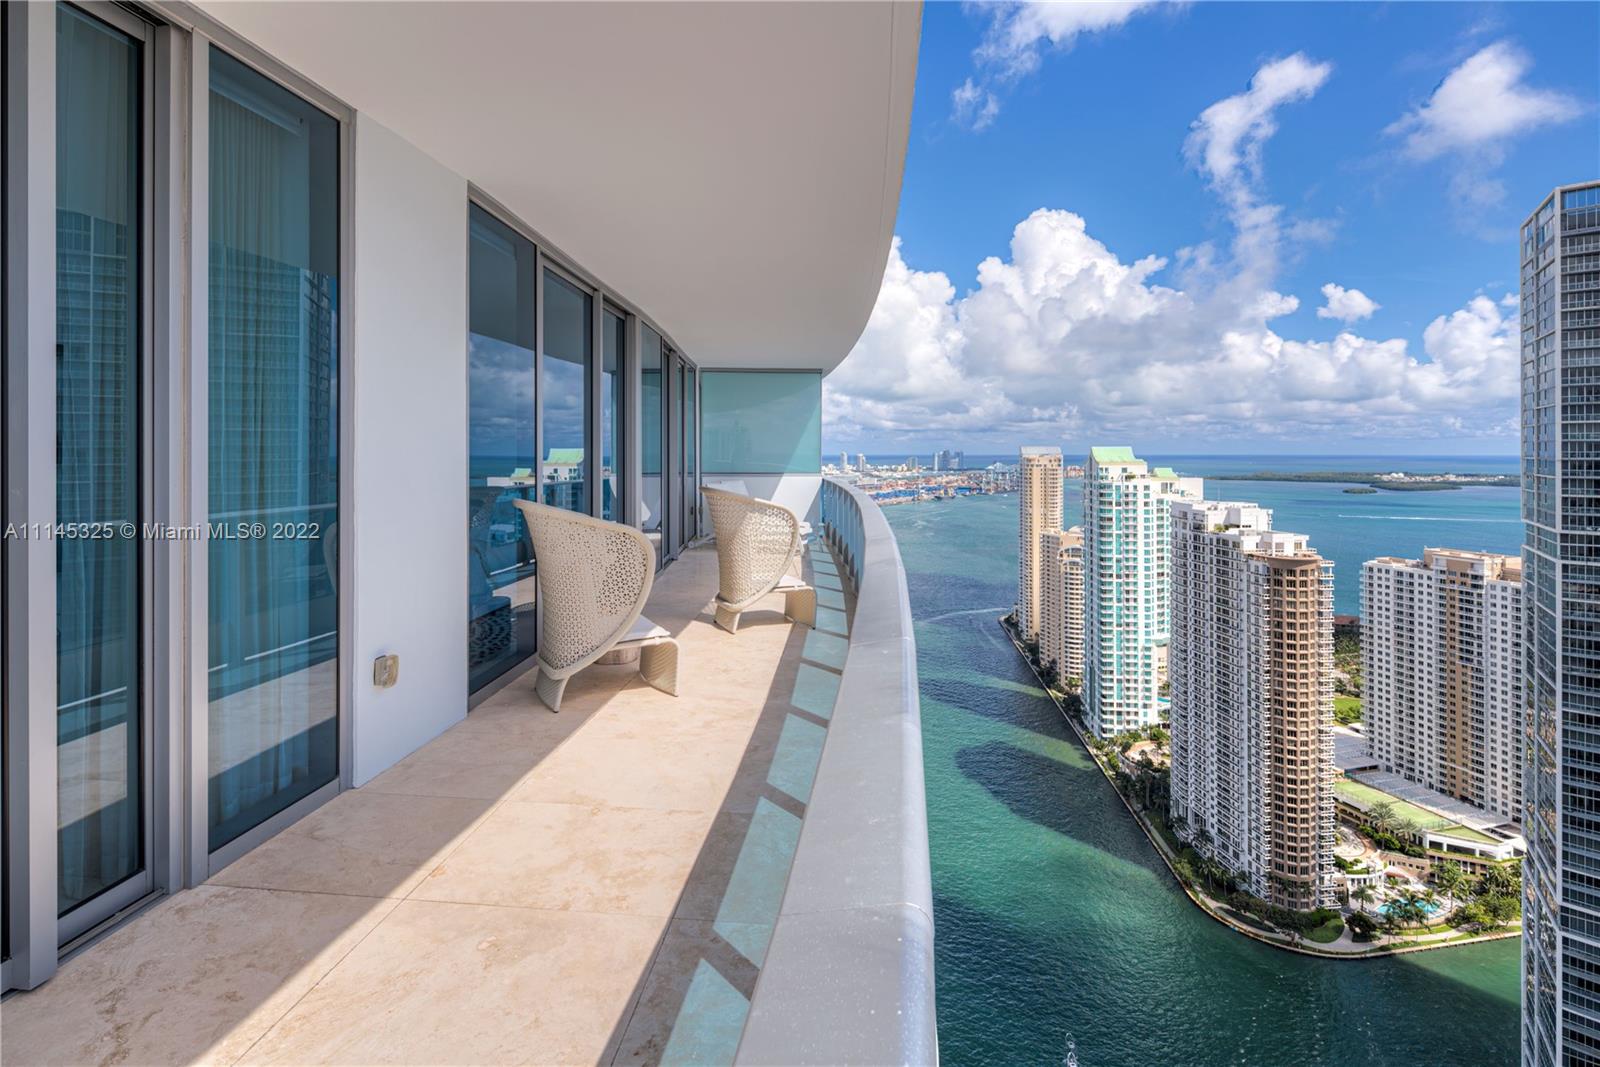 The epitome of luxury in this Epic Residence featuring the finest finishes. 3 bedroom 3 1/2 bath. The breathtaking & unobstructed views over Biscayne Bay, Brickell & Key Biscayne are stunning. This corner unit with 10ft ceilings with floor to floor ceiling windows creates an inside/outside environment where everyday the light brings a new feel to this space. Limestone floors, built in Millwork entertainment cabinet, solar shades, upgraded appliances all are details beyond expectations.  Epic has great amenities such as private pool for residences and many other shared concierge-style elements shared with The Epic Hotel. Home to world class dining with Zuma and Area 31. 2 parking spaces. and a private storage locker. Epic is your dream space you've been waiting for. Easy to show.